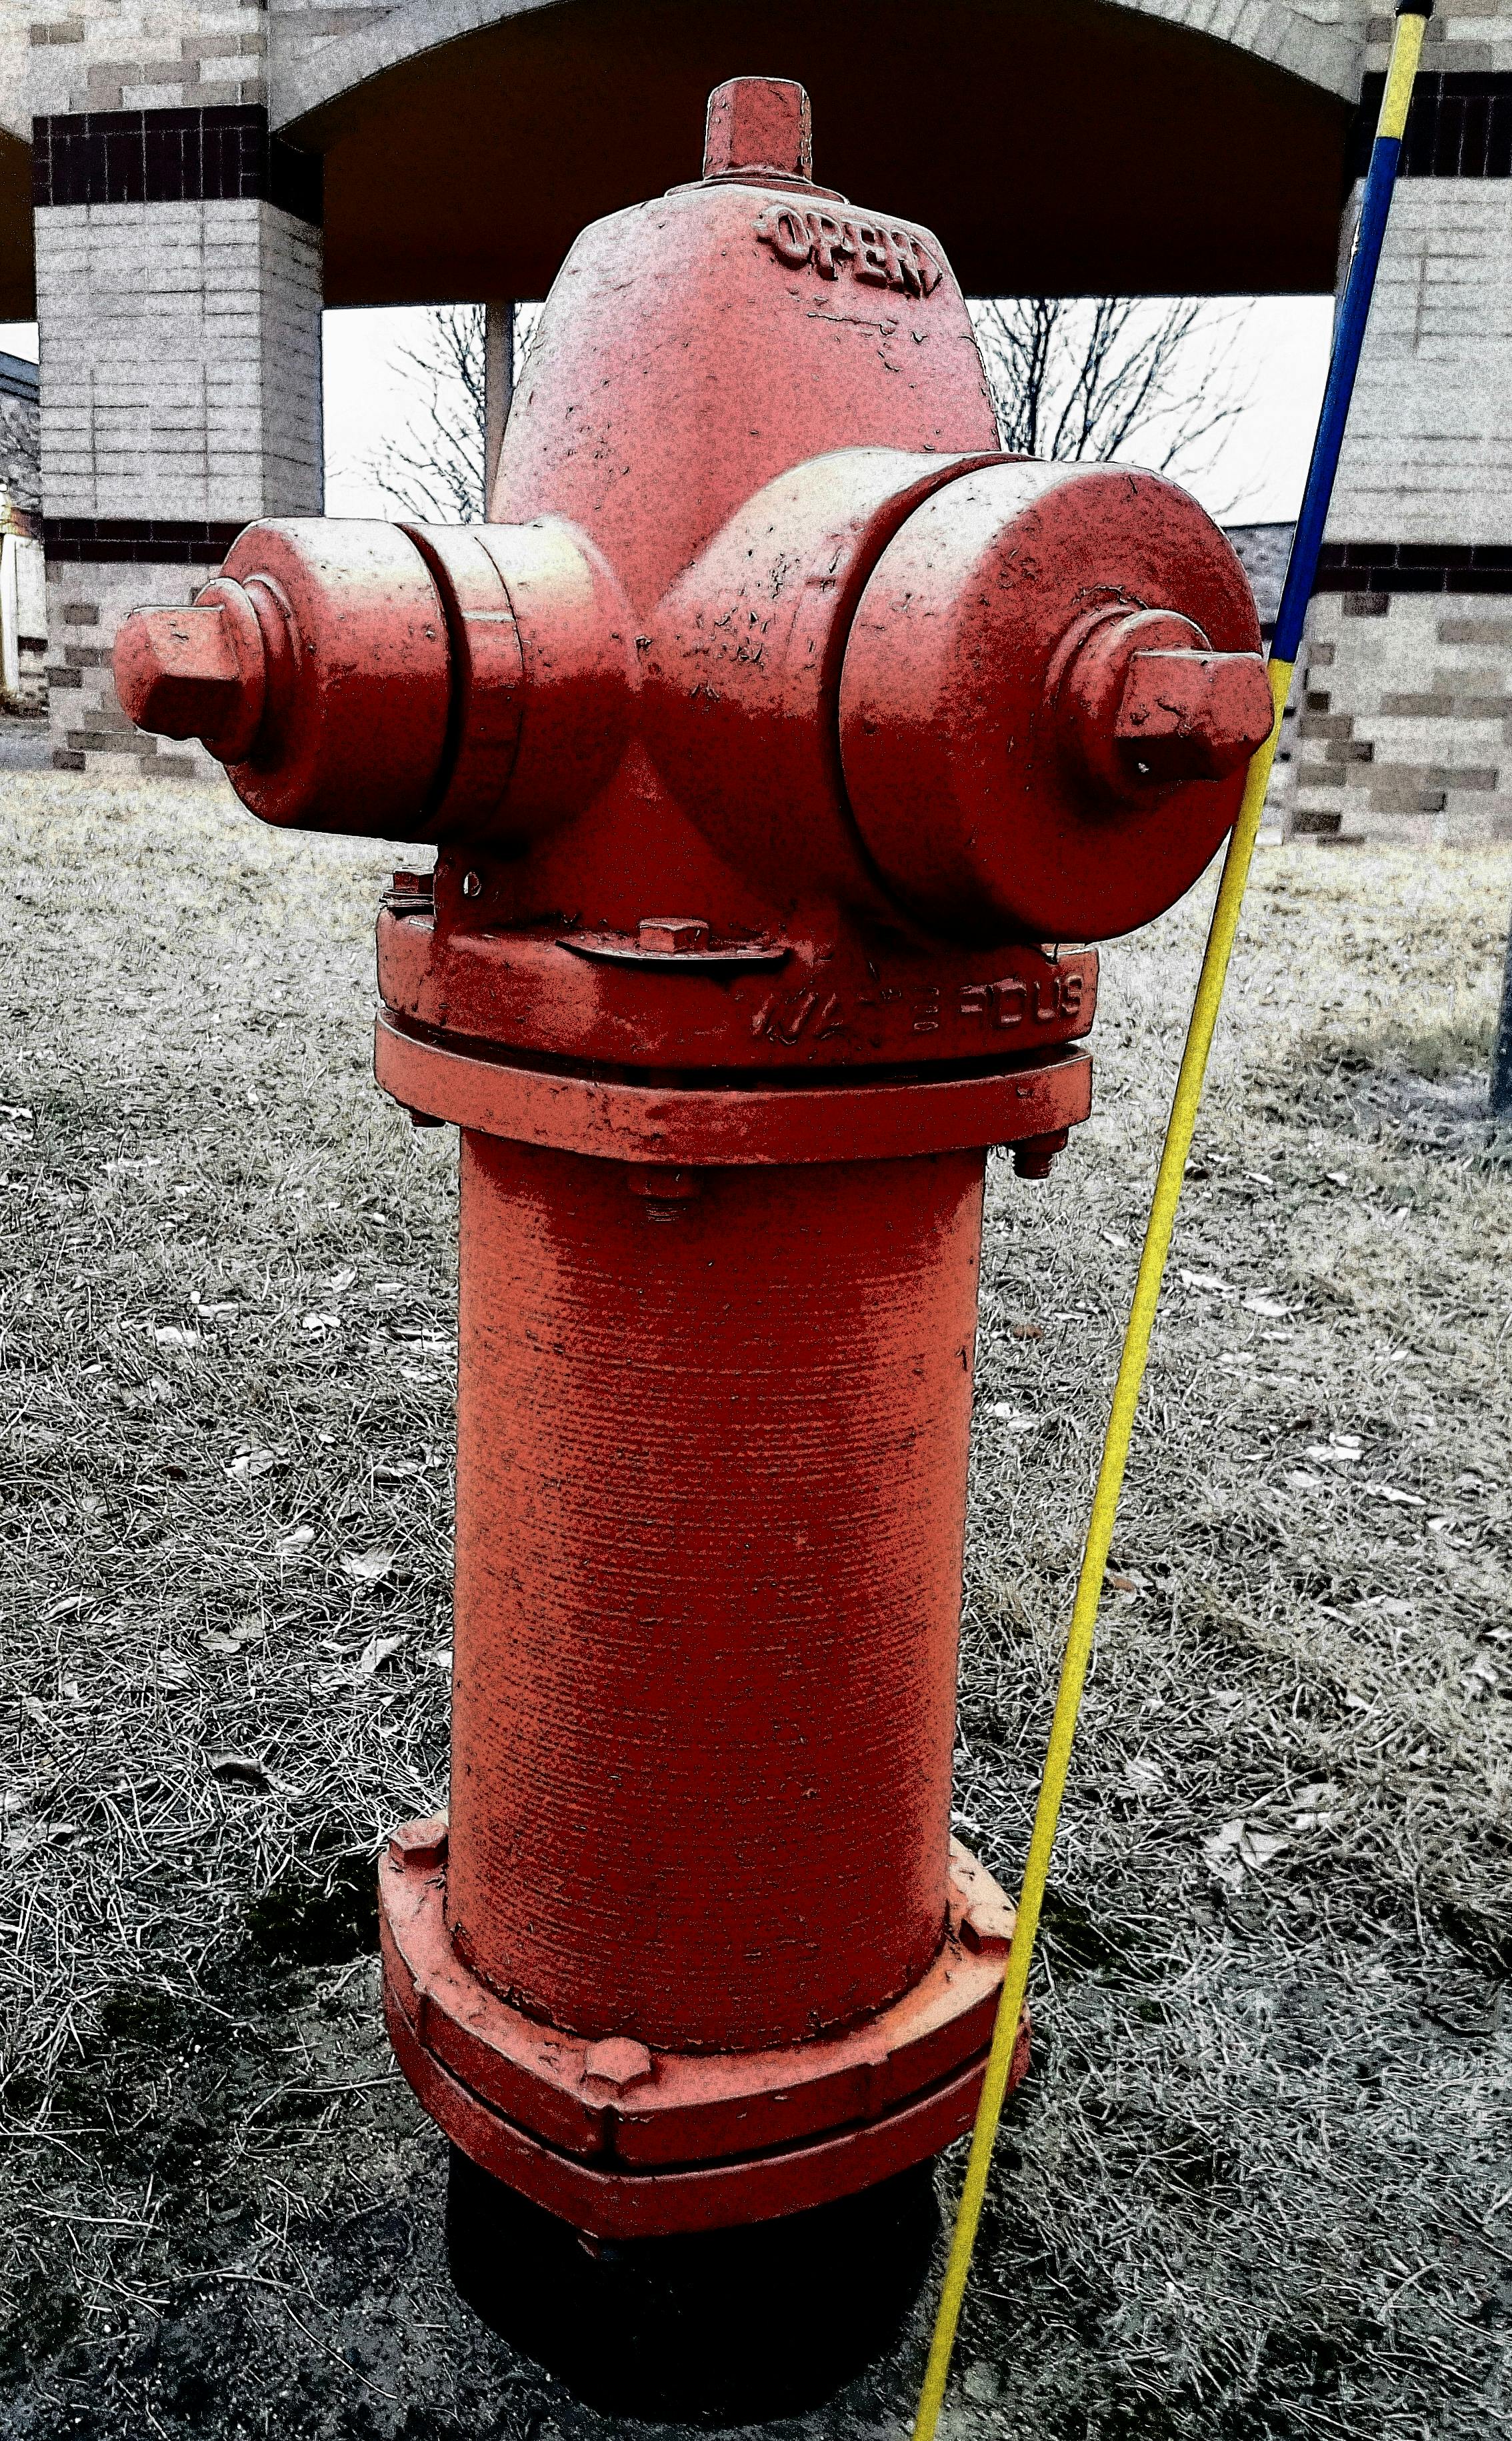 Free stock photo of #fire hydrant